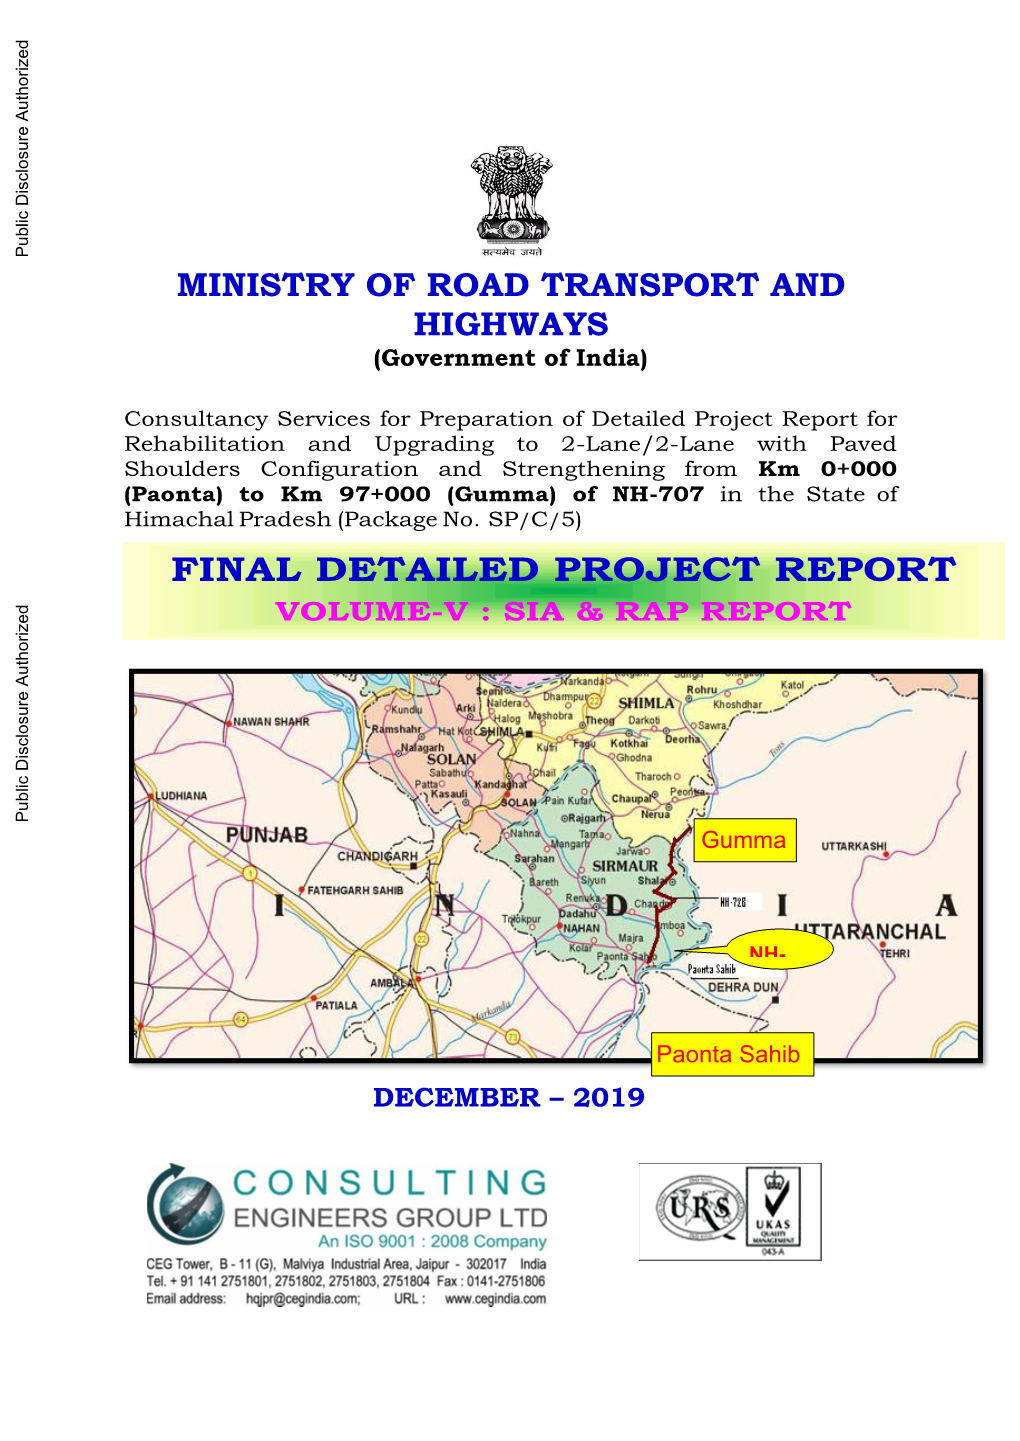 MINISTRY of ROAD TRANSPORT and HIGHWAYS (Government of India)